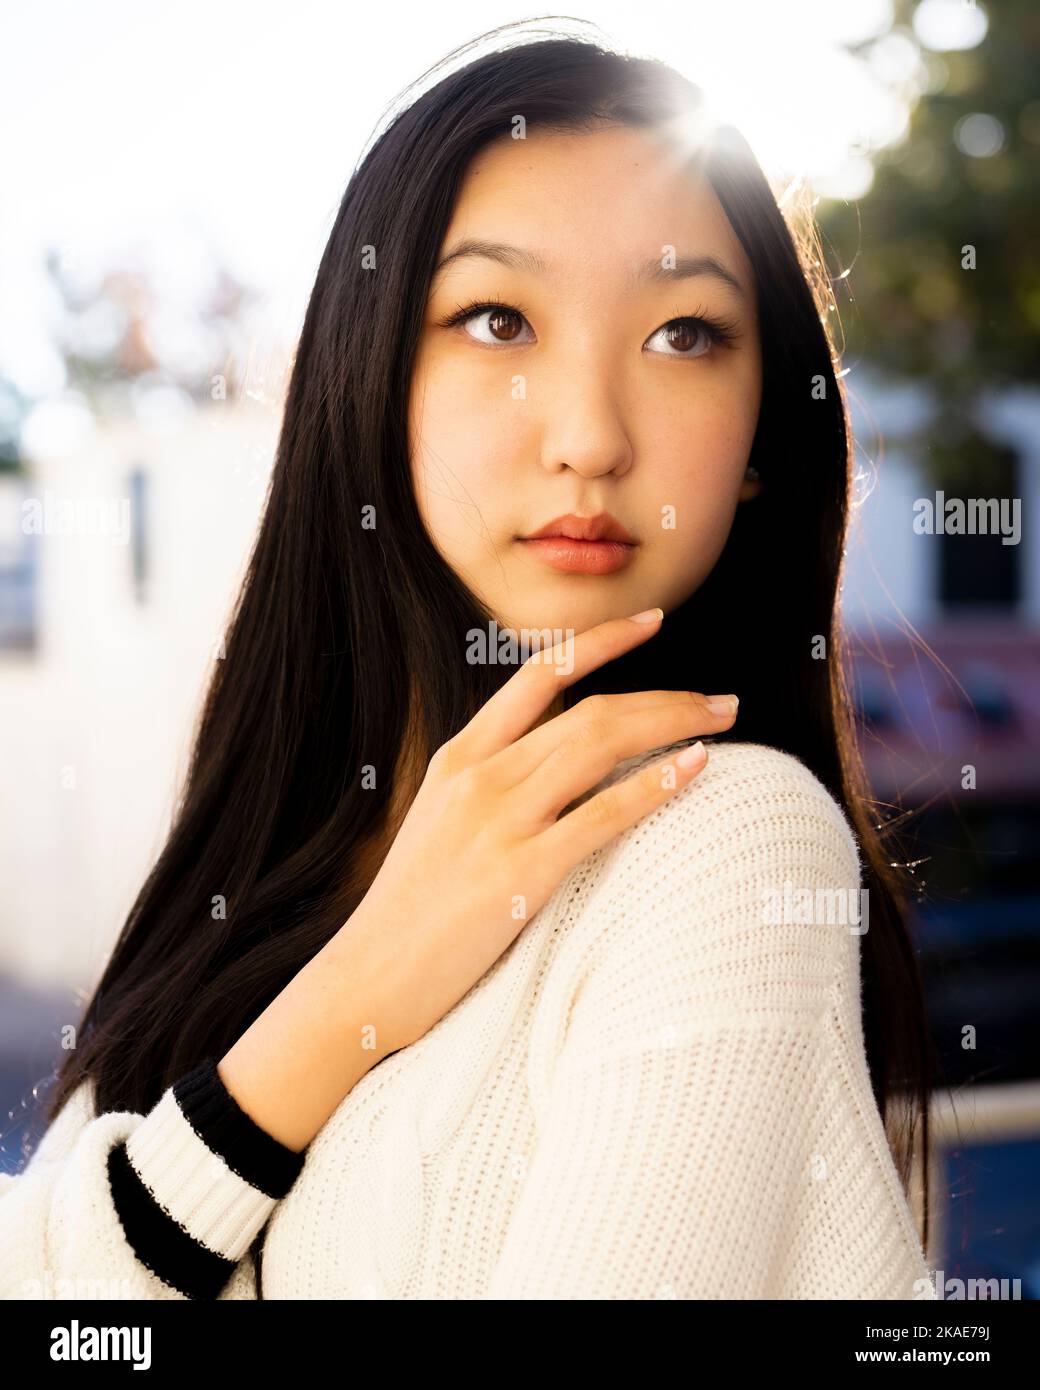 Backlit Golden Hour Portrait of  Multiracial Teenage Female in Downtown Palo Alto | Warm Tones Stock Photo